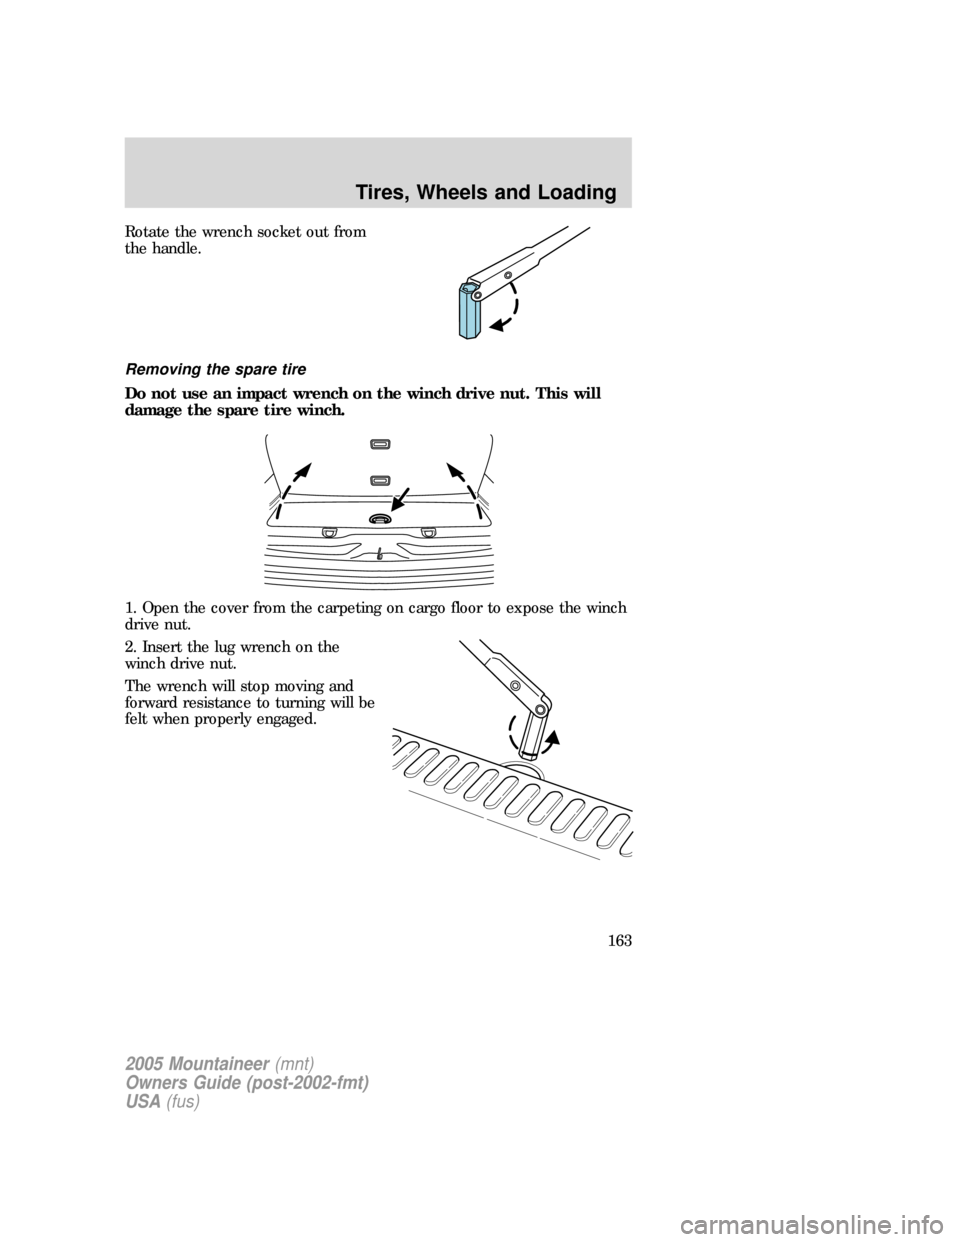 Mercury Mountaineer 2005  Owners Manuals Rotate the wrench socket out from
the handle.
Removing the spare tire
Do not use an impact wrench on the winch drive nut. This will
damage the spare tire winch.
1. Open the cover from the carpeting on